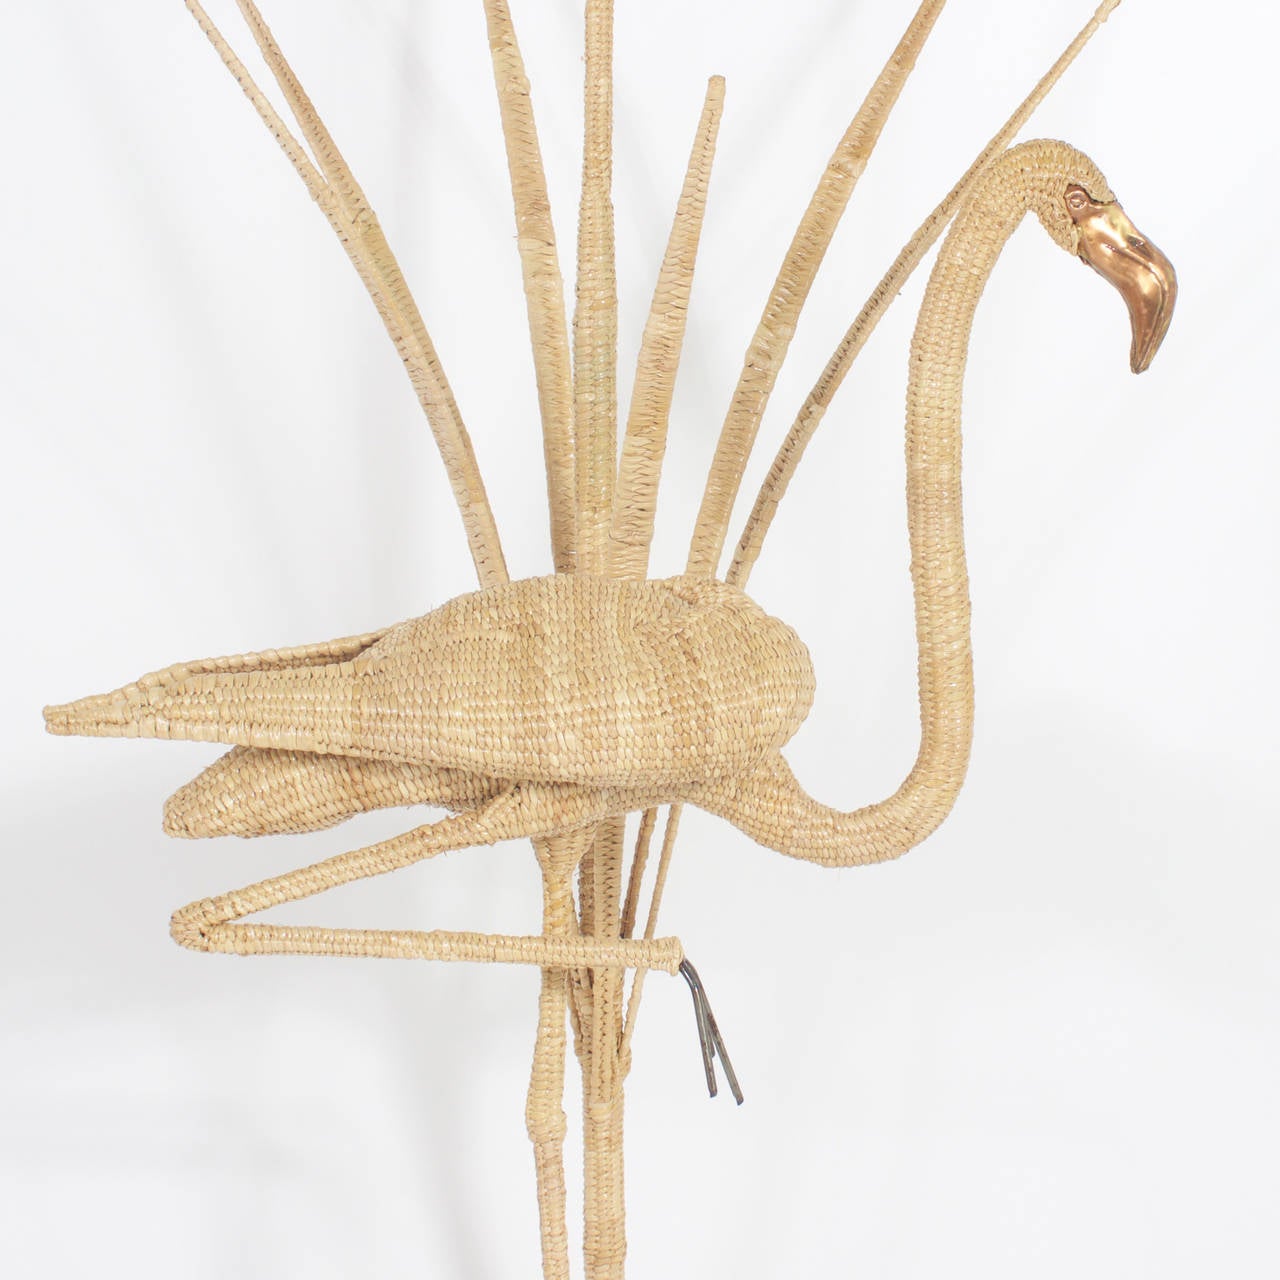 Mario Torres Flamingo floor lamp striking a familiar one legged pose. Constructed of a metal frame wrapped in wicker or reed. Featuring brass beaks and eyes, standing in front of a patch of reeds. Signed Mario Torres, EST. 1974 on a brass medallion.